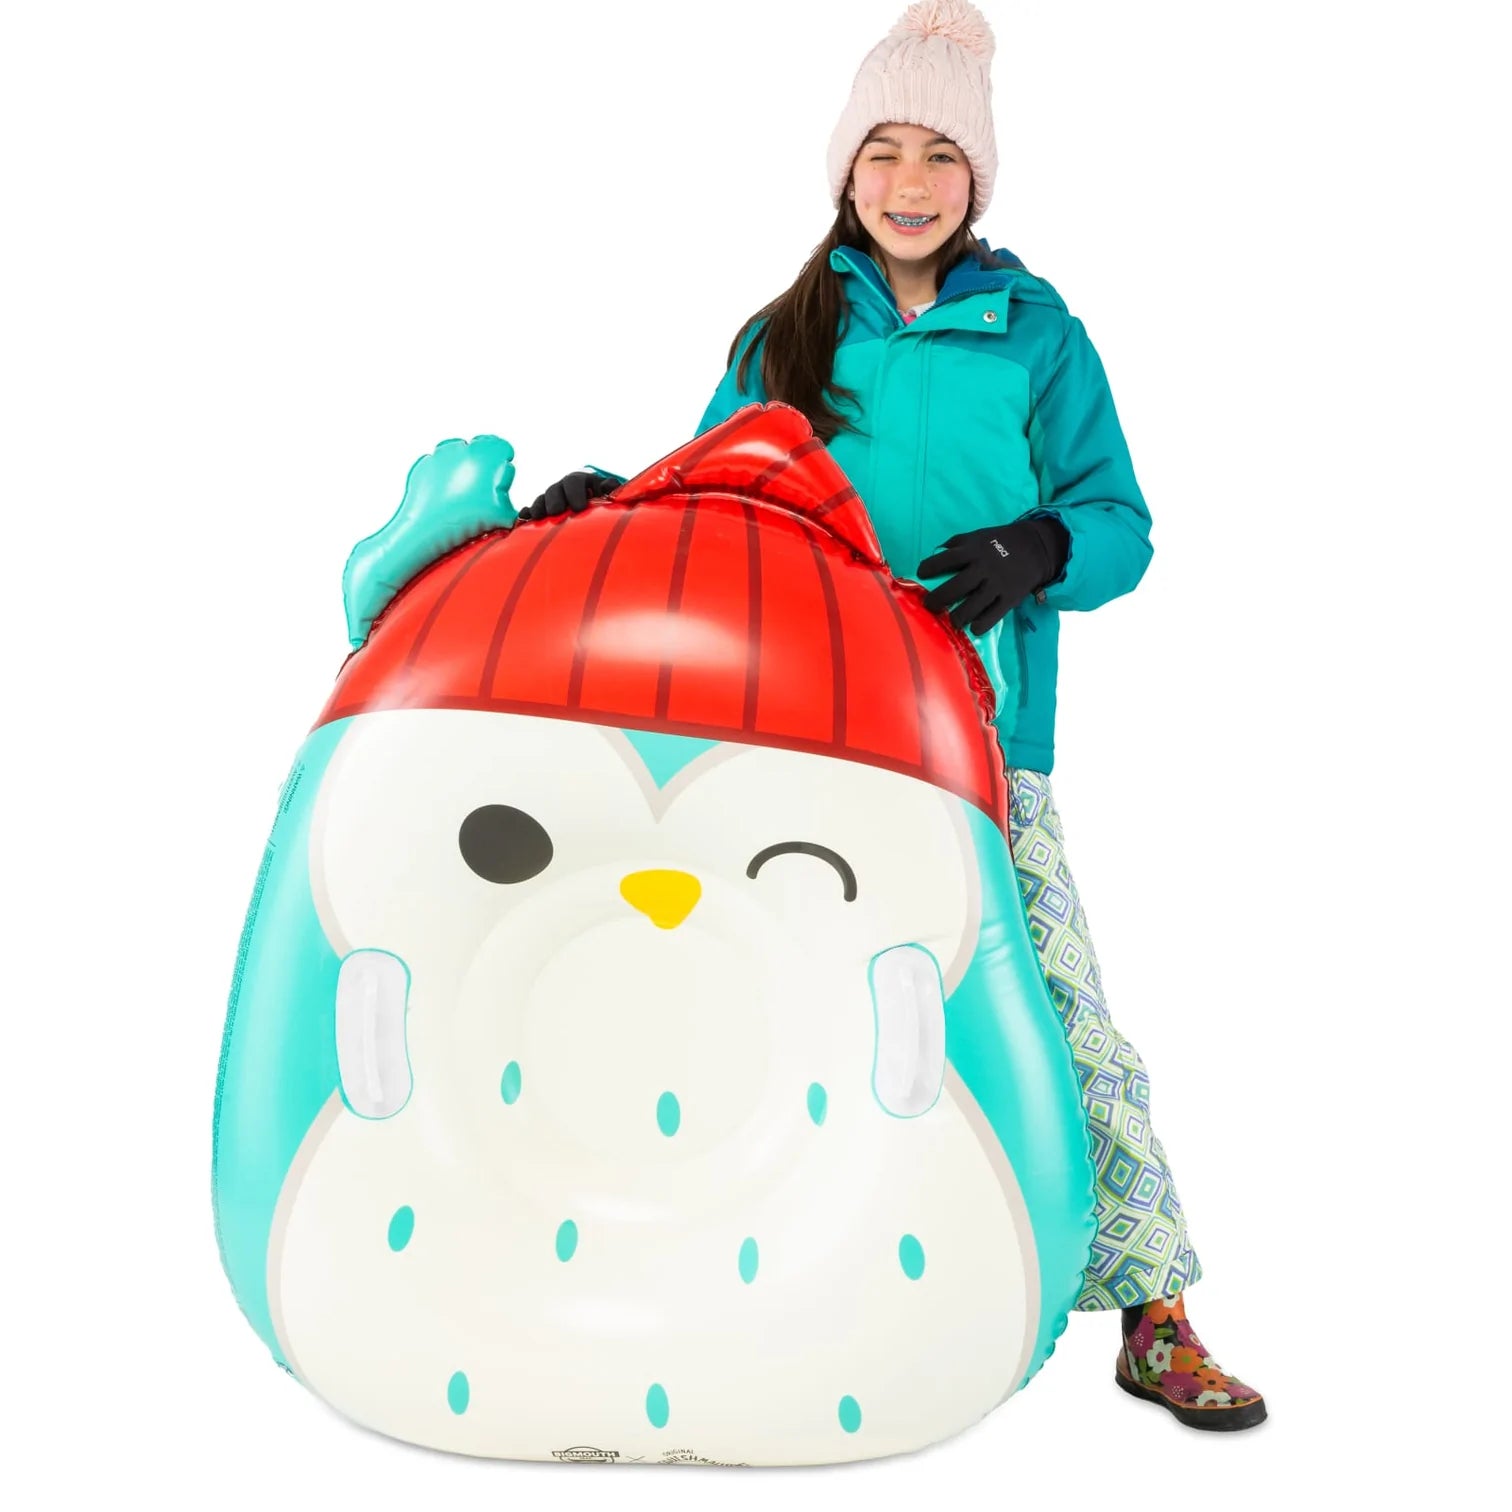 Cute and Fun Inflatable Snow Tubes